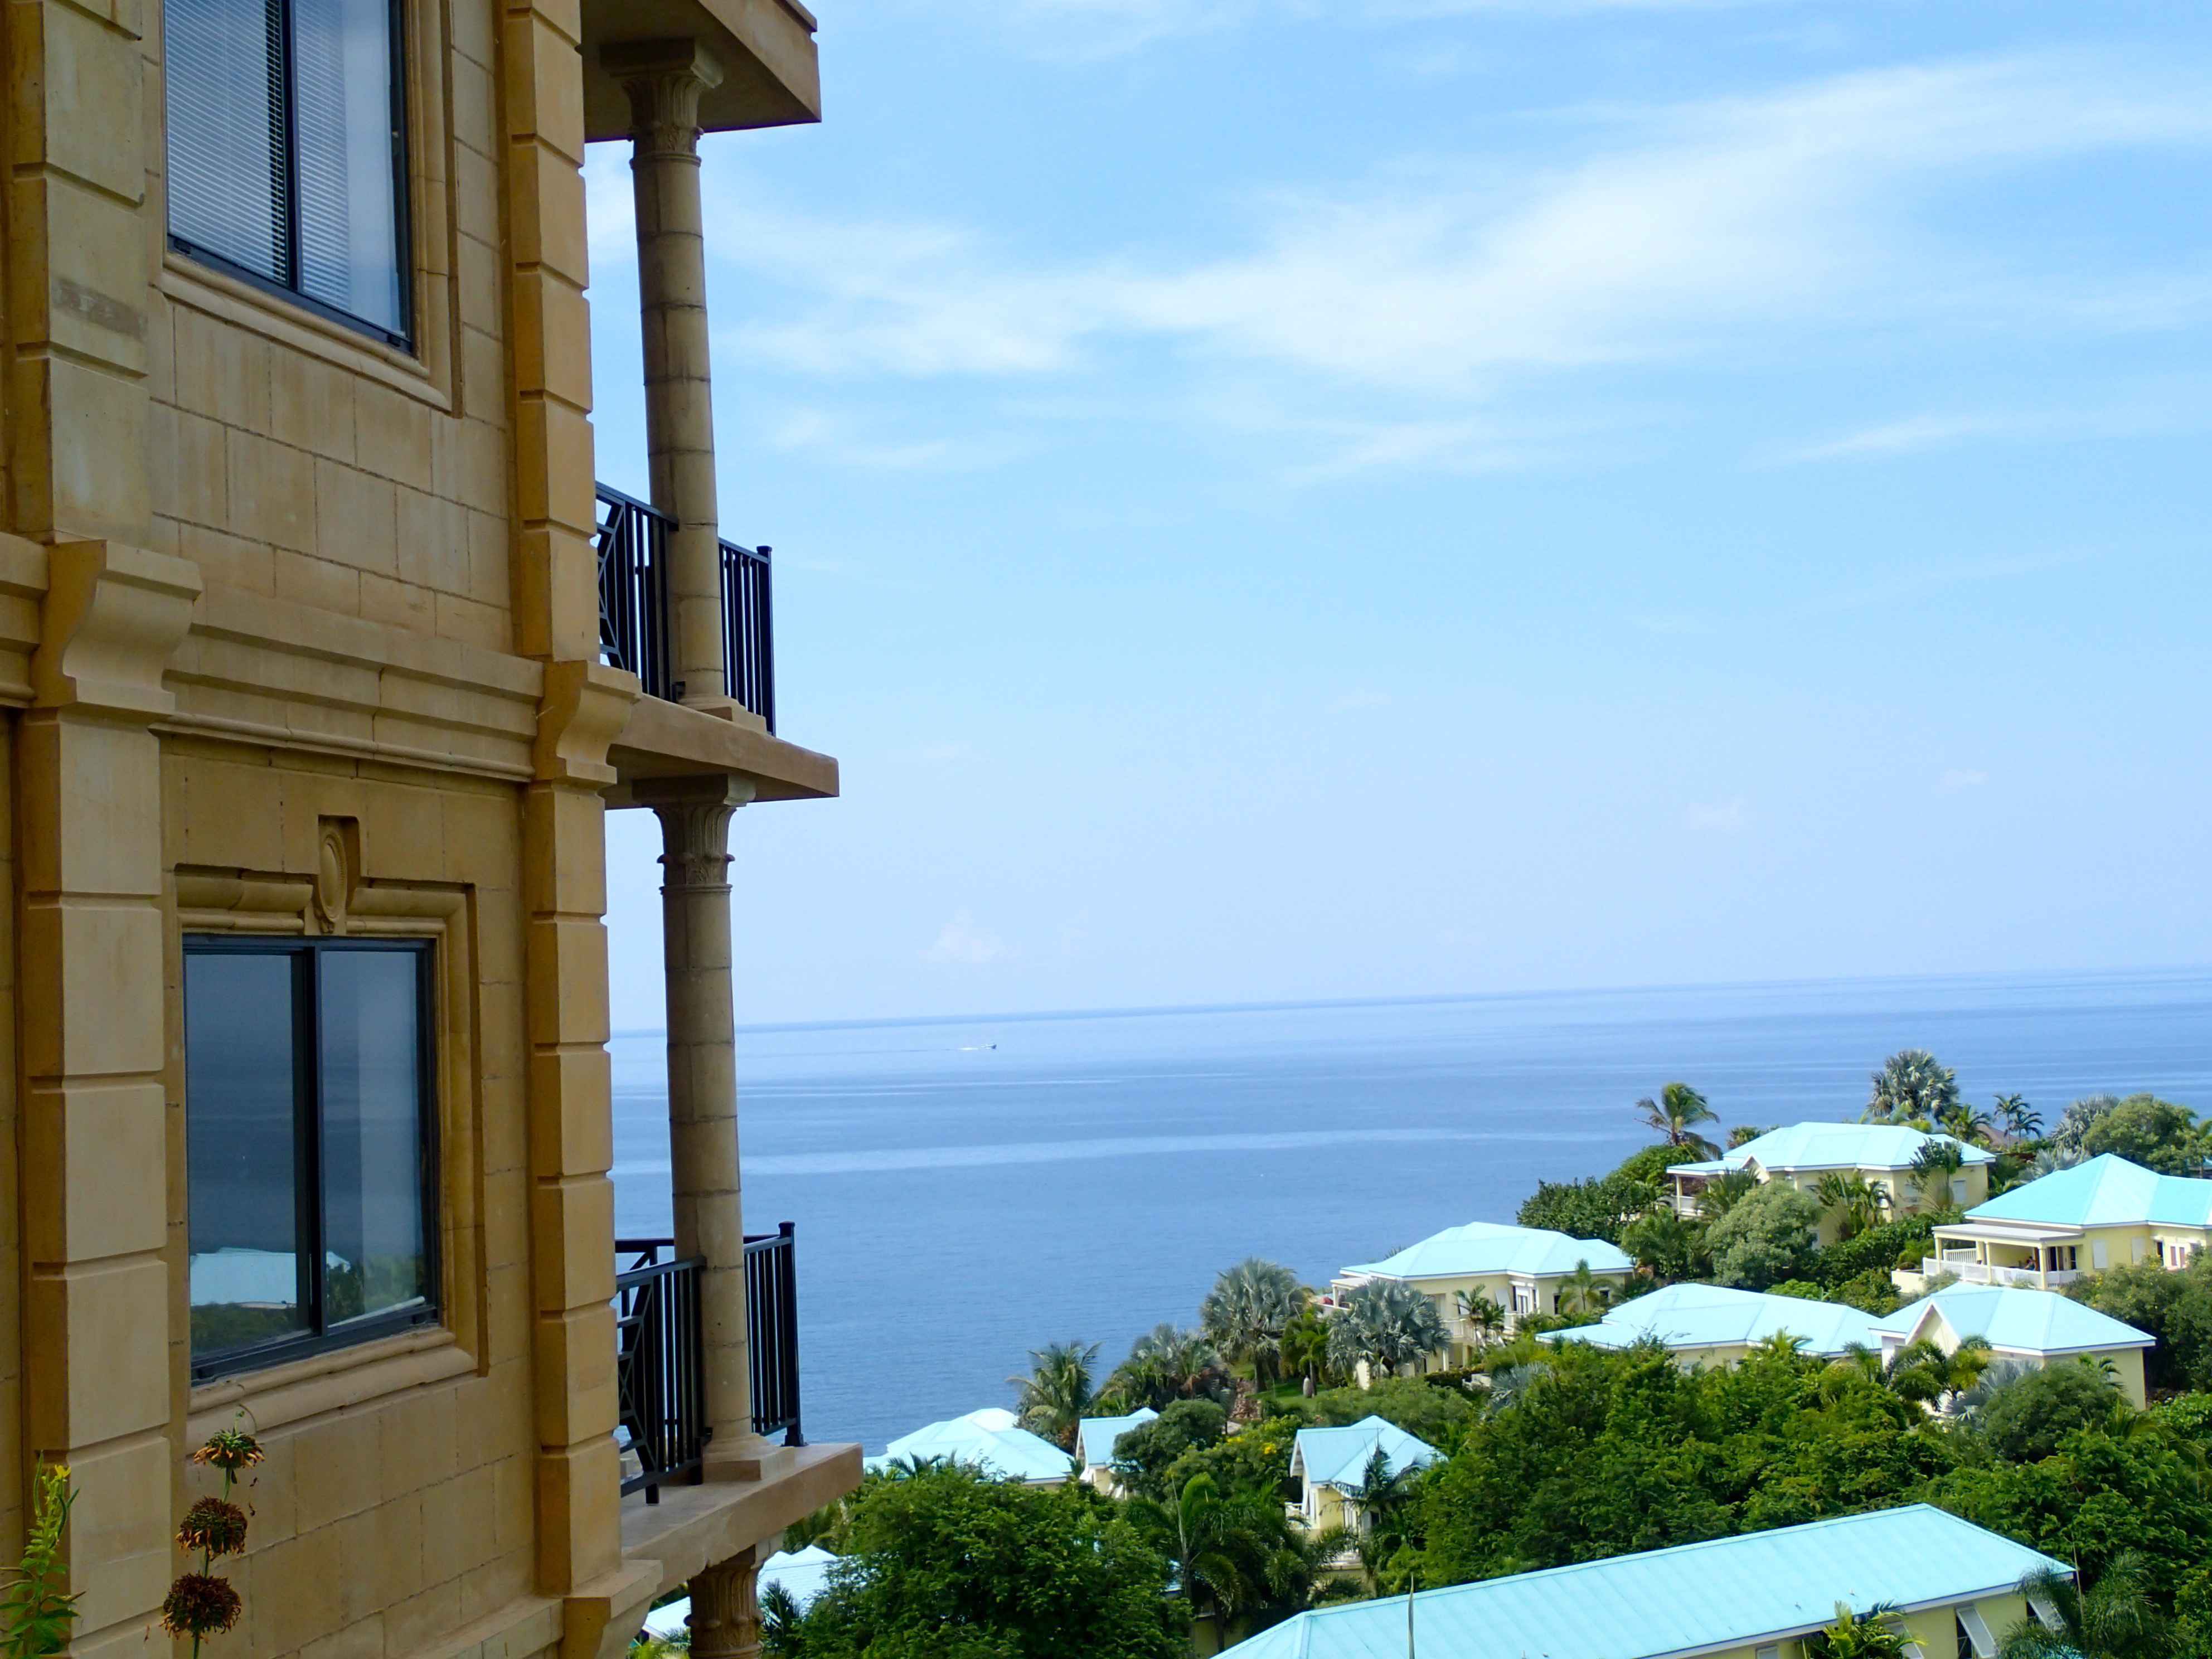 Views of the Manor by the Sea 3 Bed - 3 Bath Condo Student Rentals